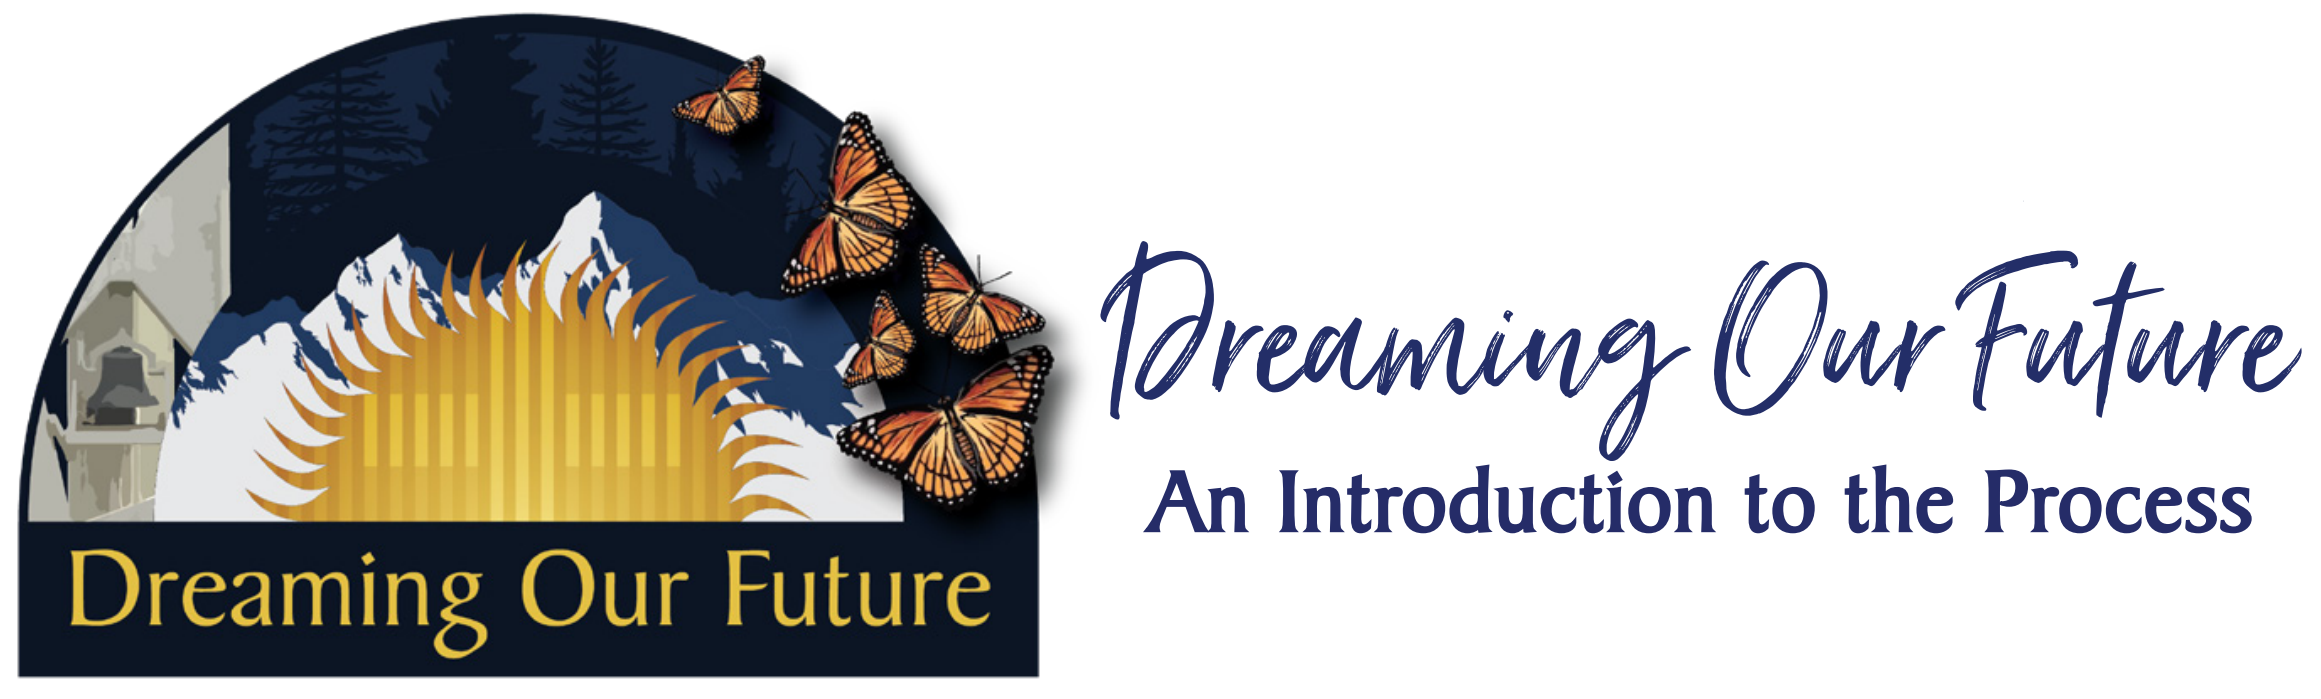 Dreaming Our Future - An Introduction to the Process